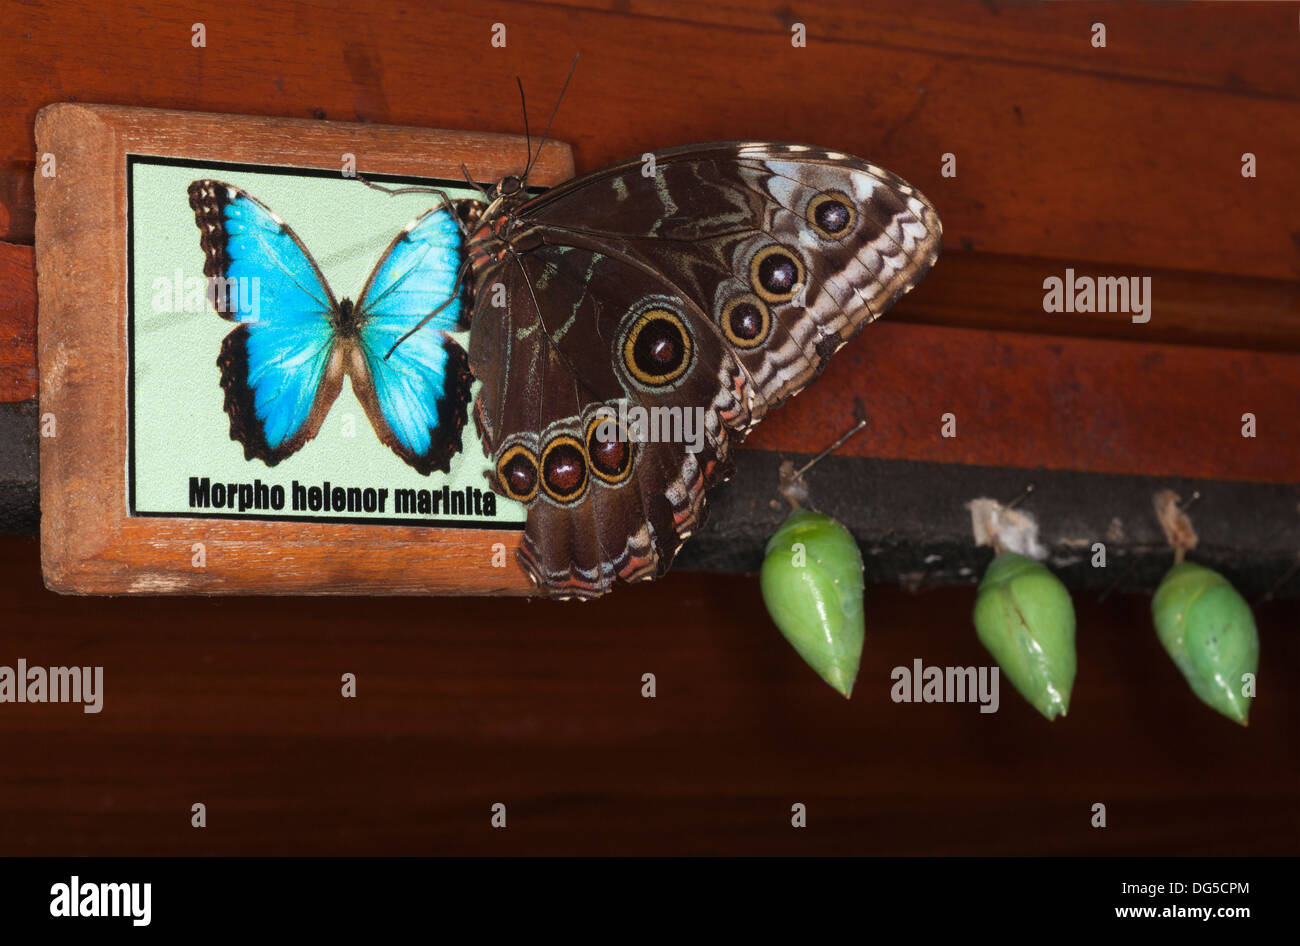 Blue Morpho butterfly and chrysalides on interpretive sign showing latin name with genus, species and subspecies in Linnaean system of nomenclature Stock Photo